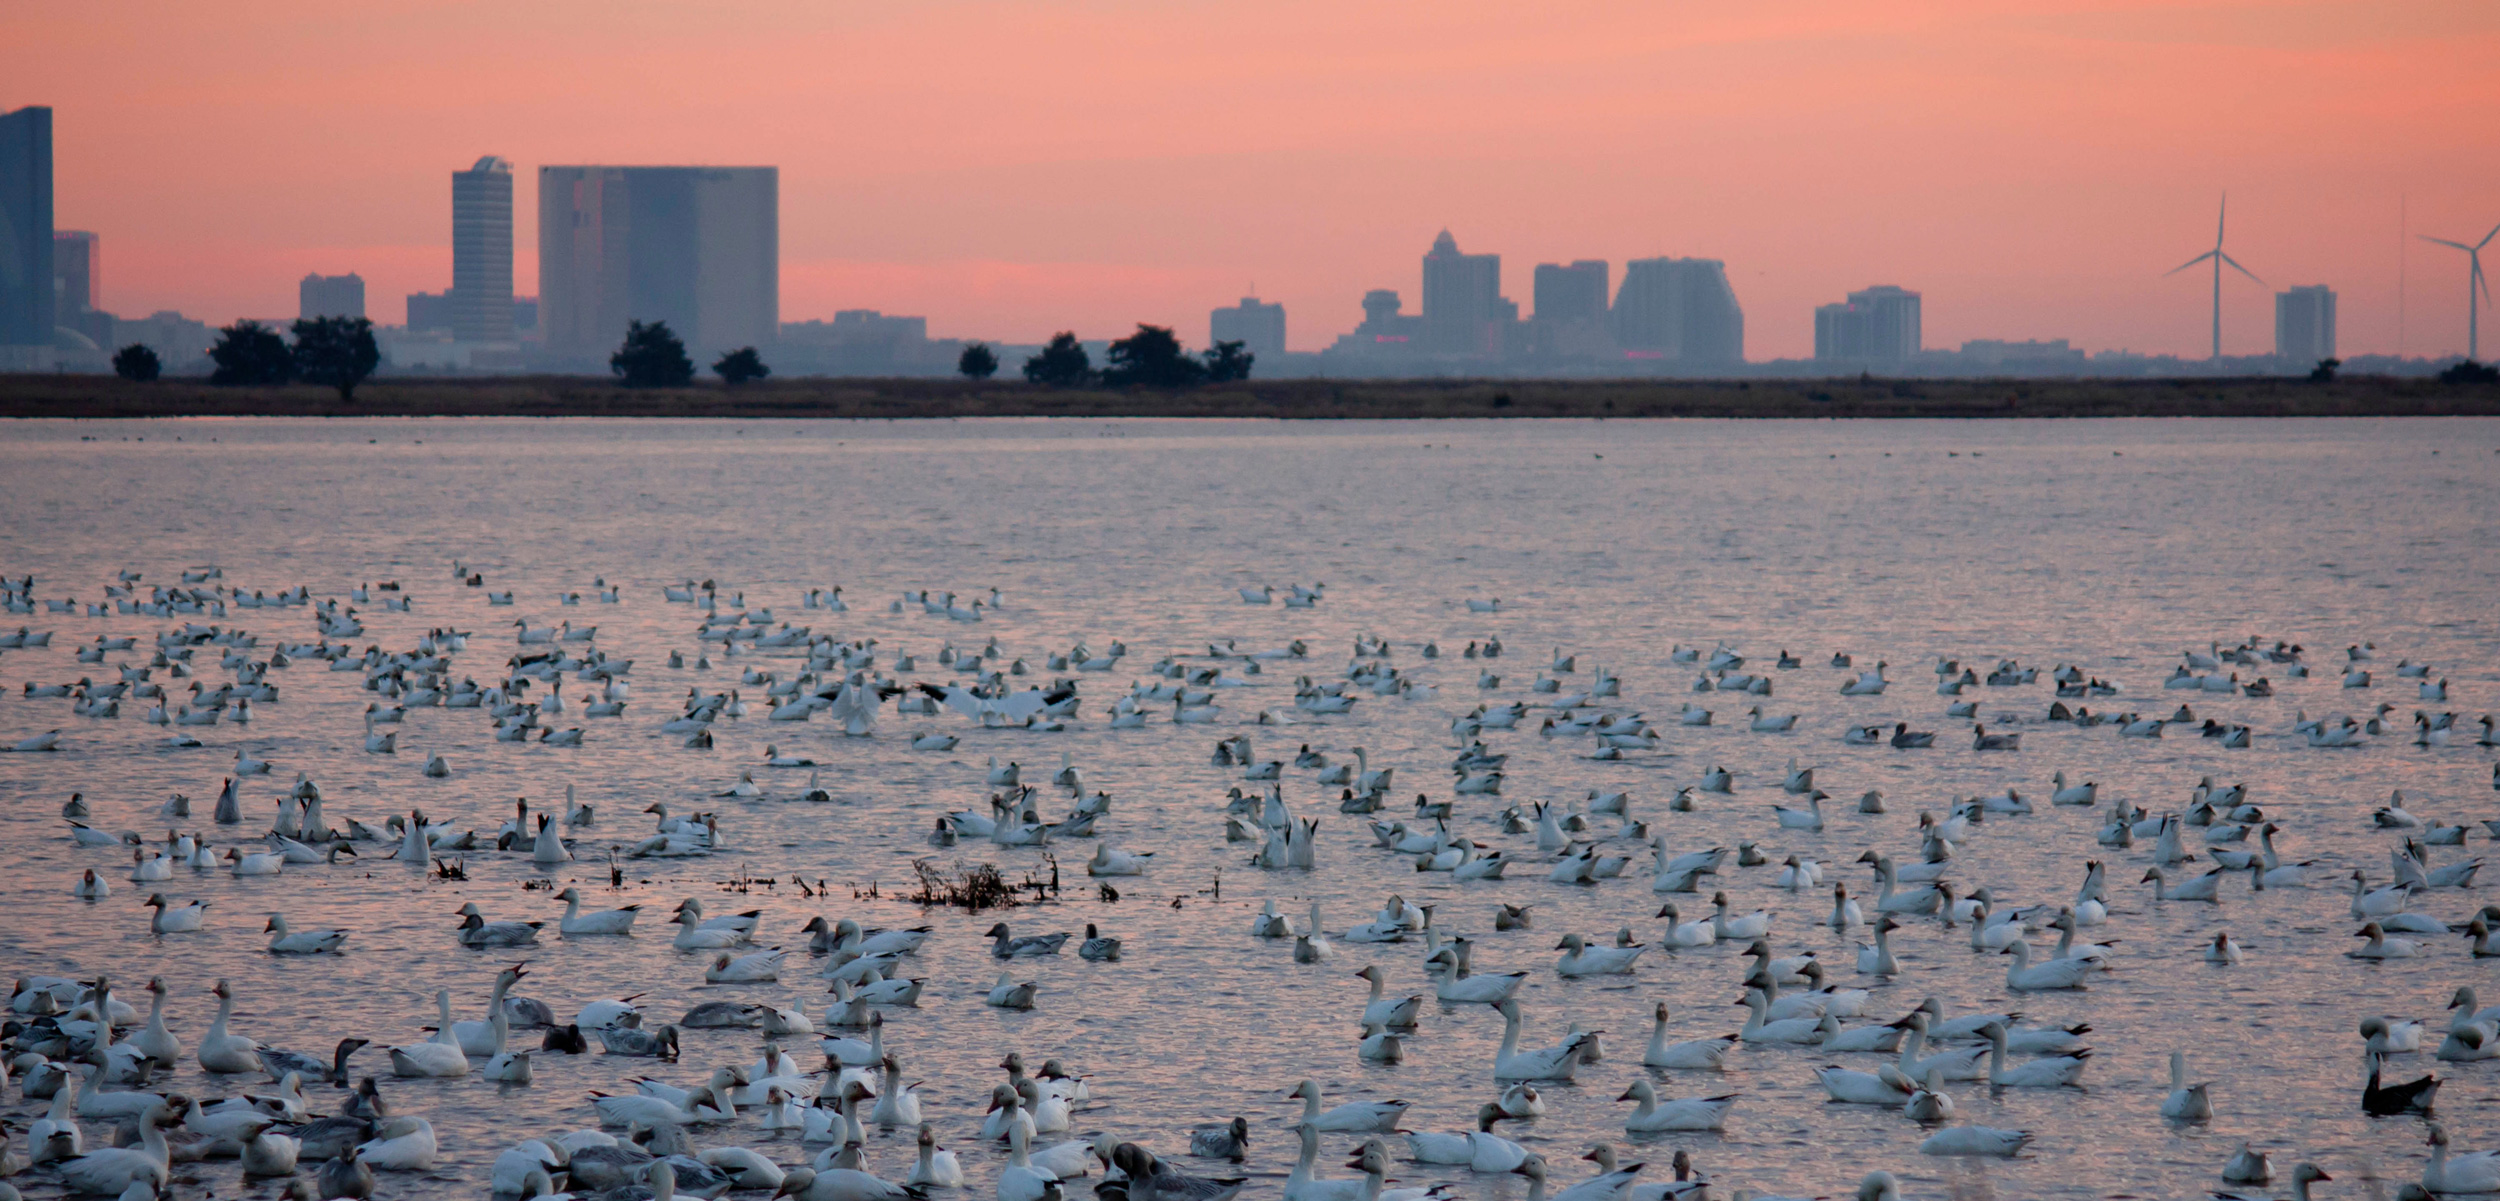 A flock of snow geese in front of the Atlantic city skyline